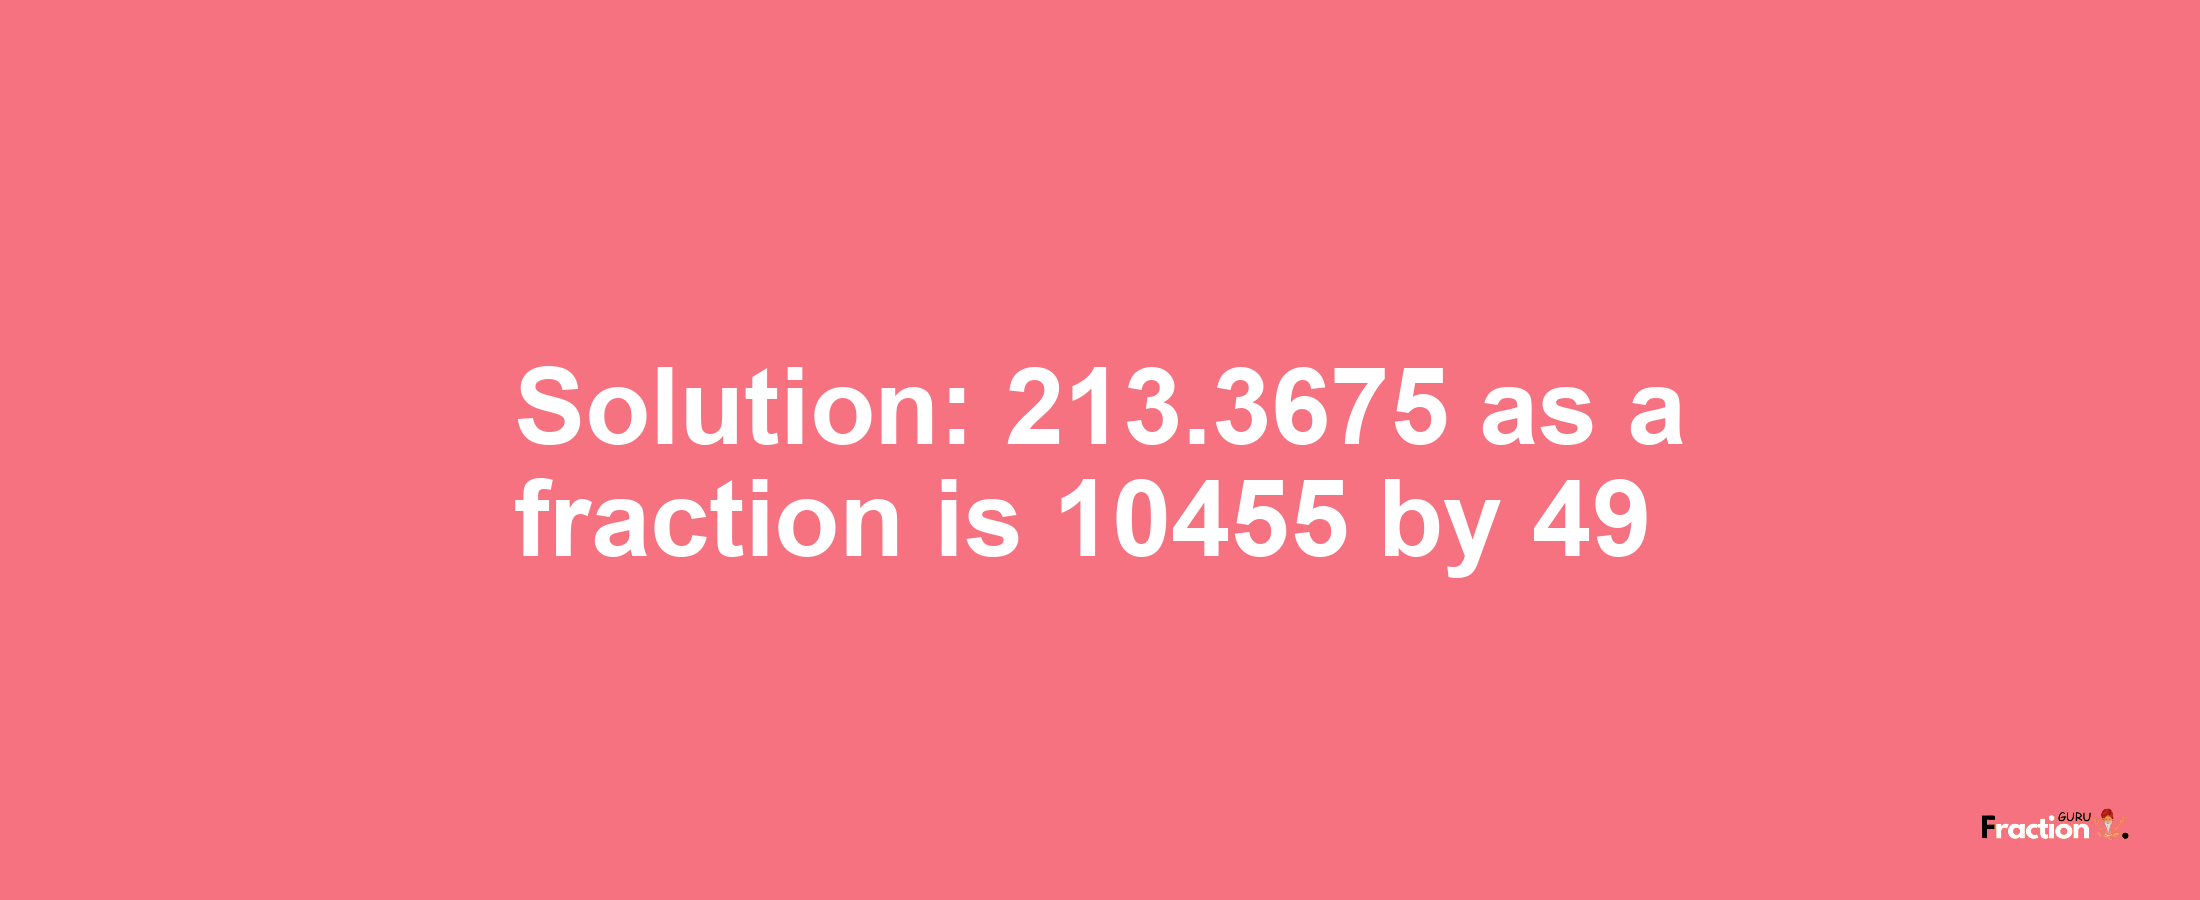 Solution:213.3675 as a fraction is 10455/49